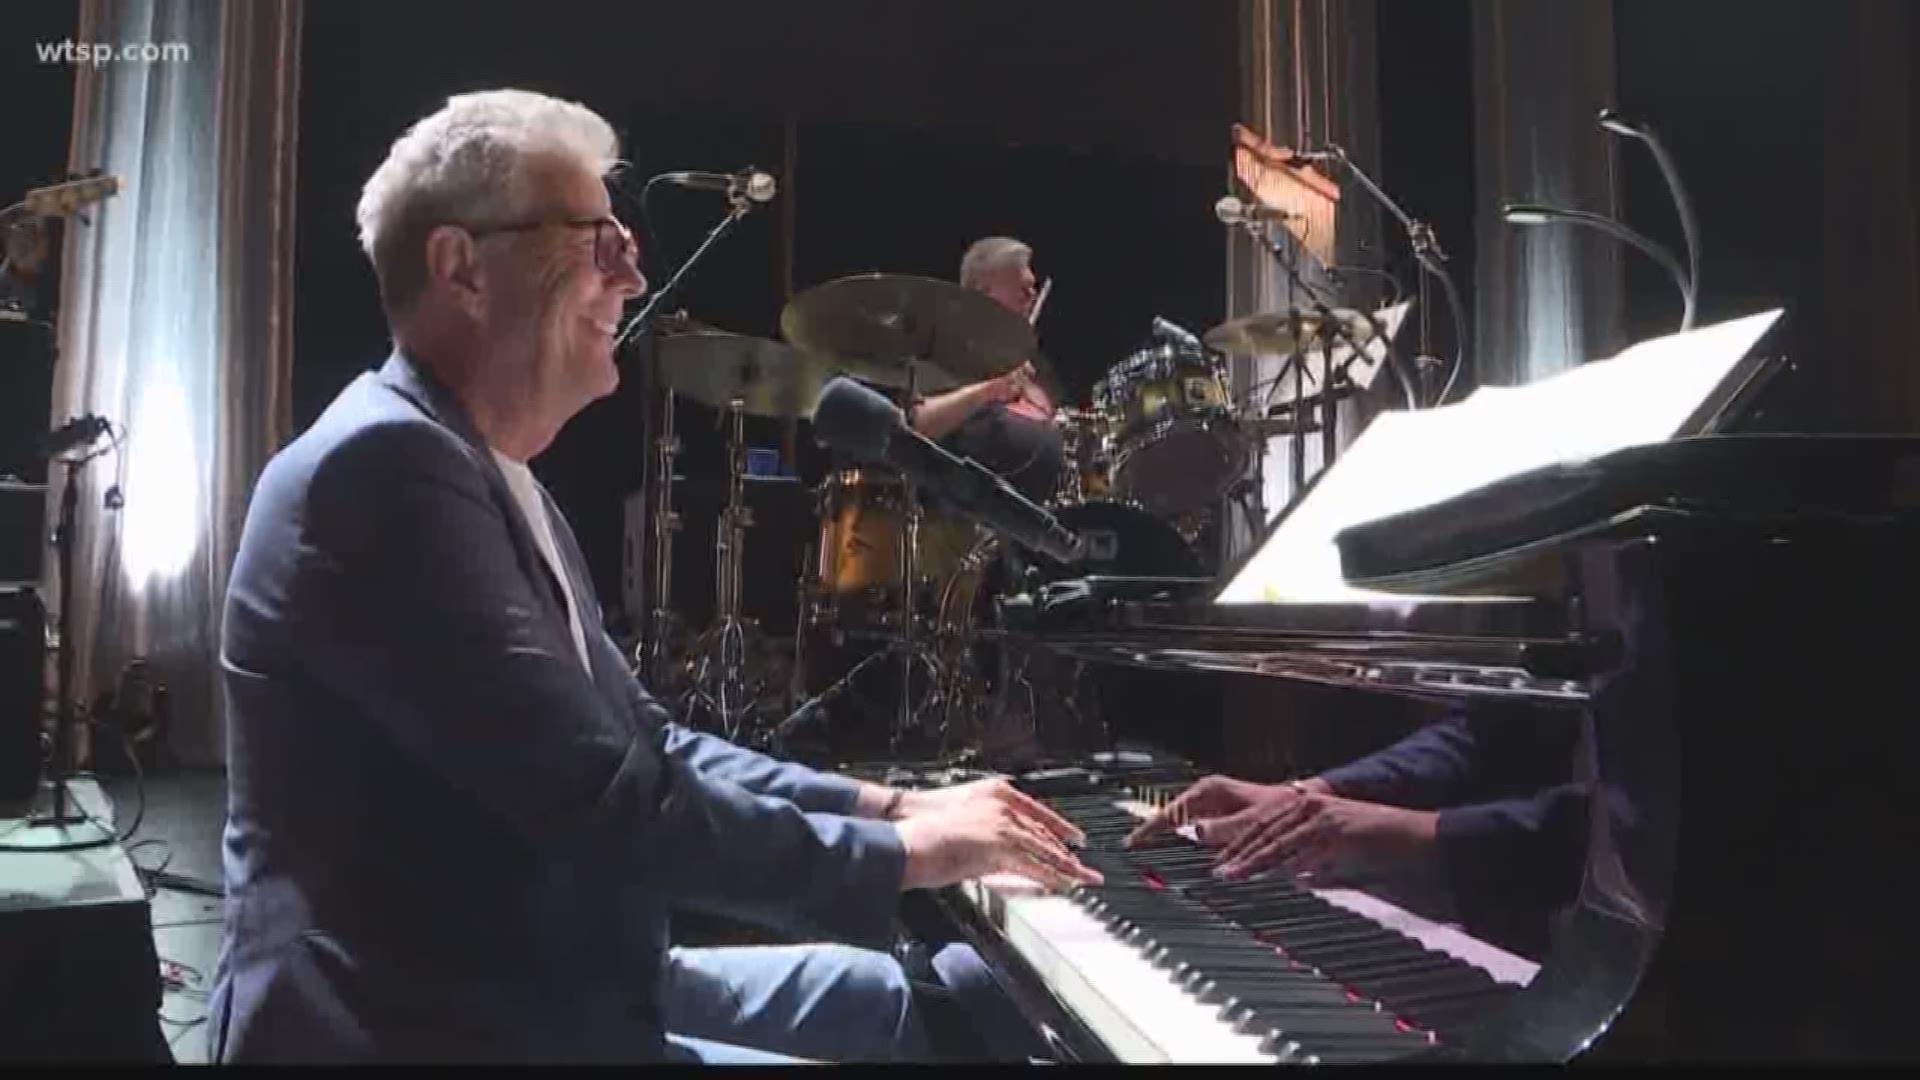 10News Brightside social media anchor Jabari Thomas caught up with music legend David Foster before his performance at Ruth Eckerd Hall in Clearwater.